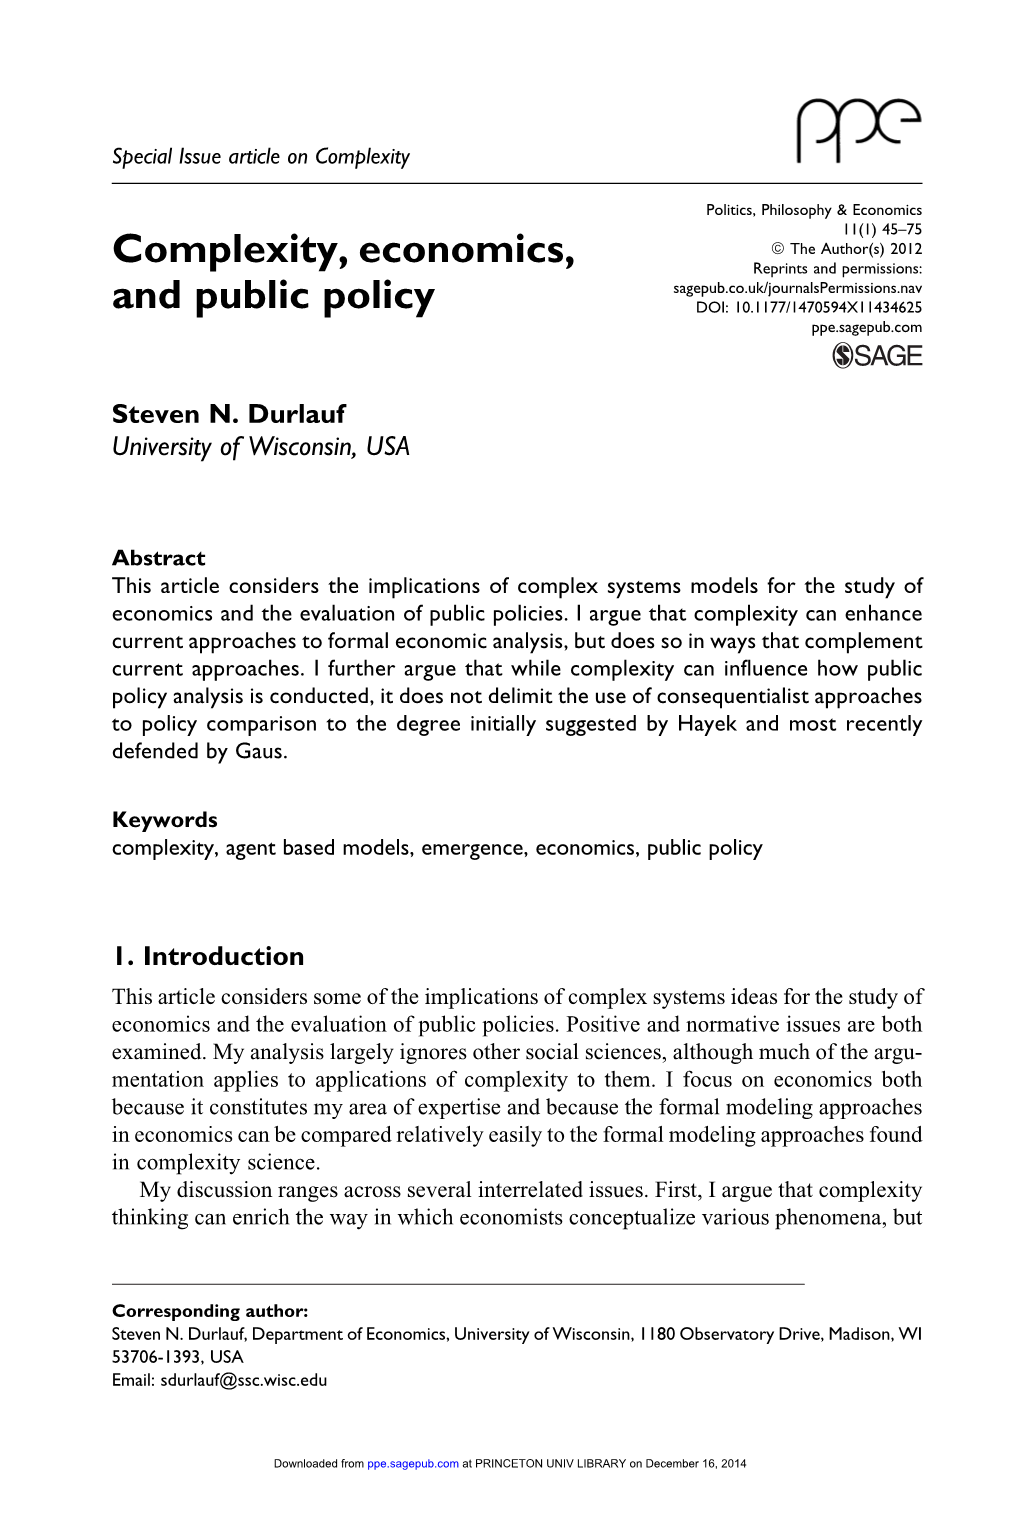 Complexity, Economics, and Public Policy